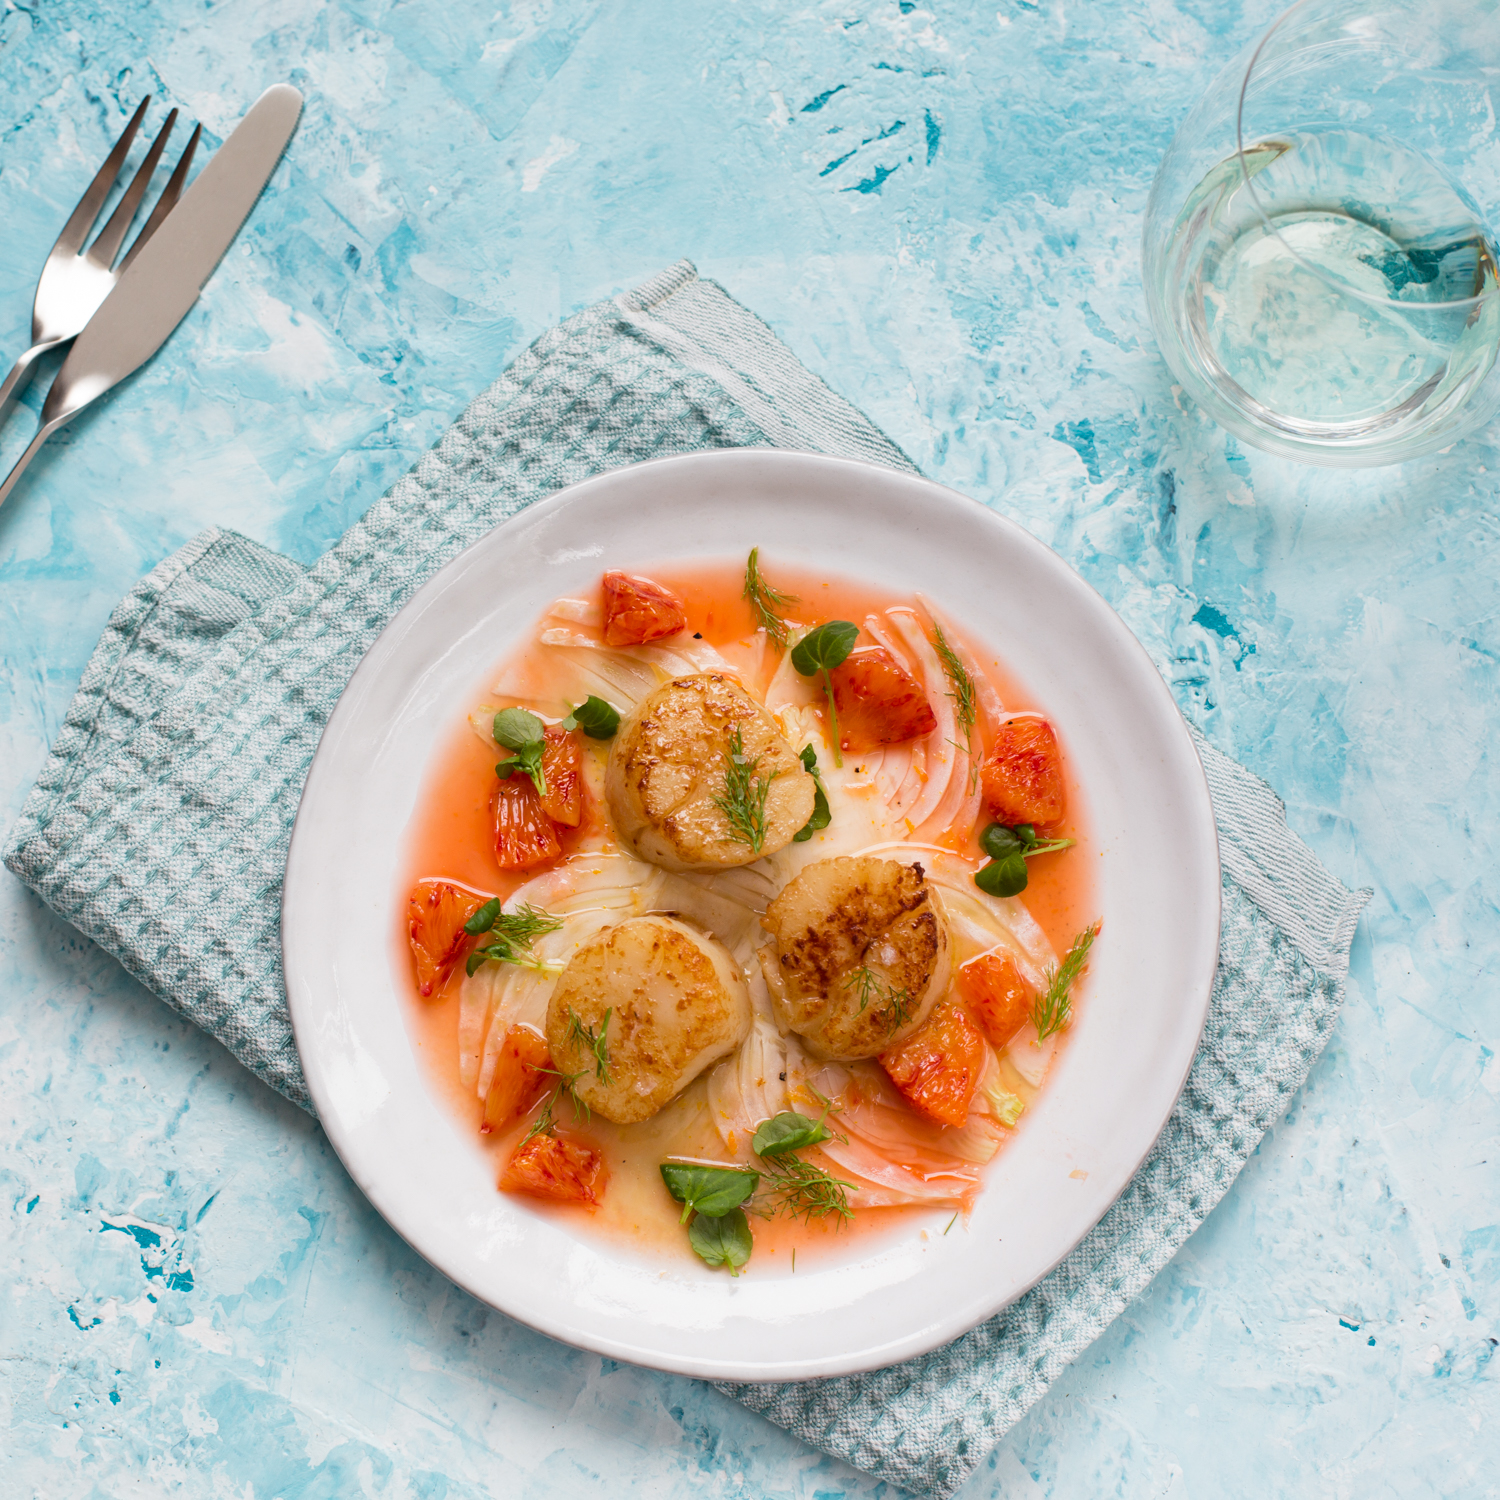 scallops goes well with blood orange